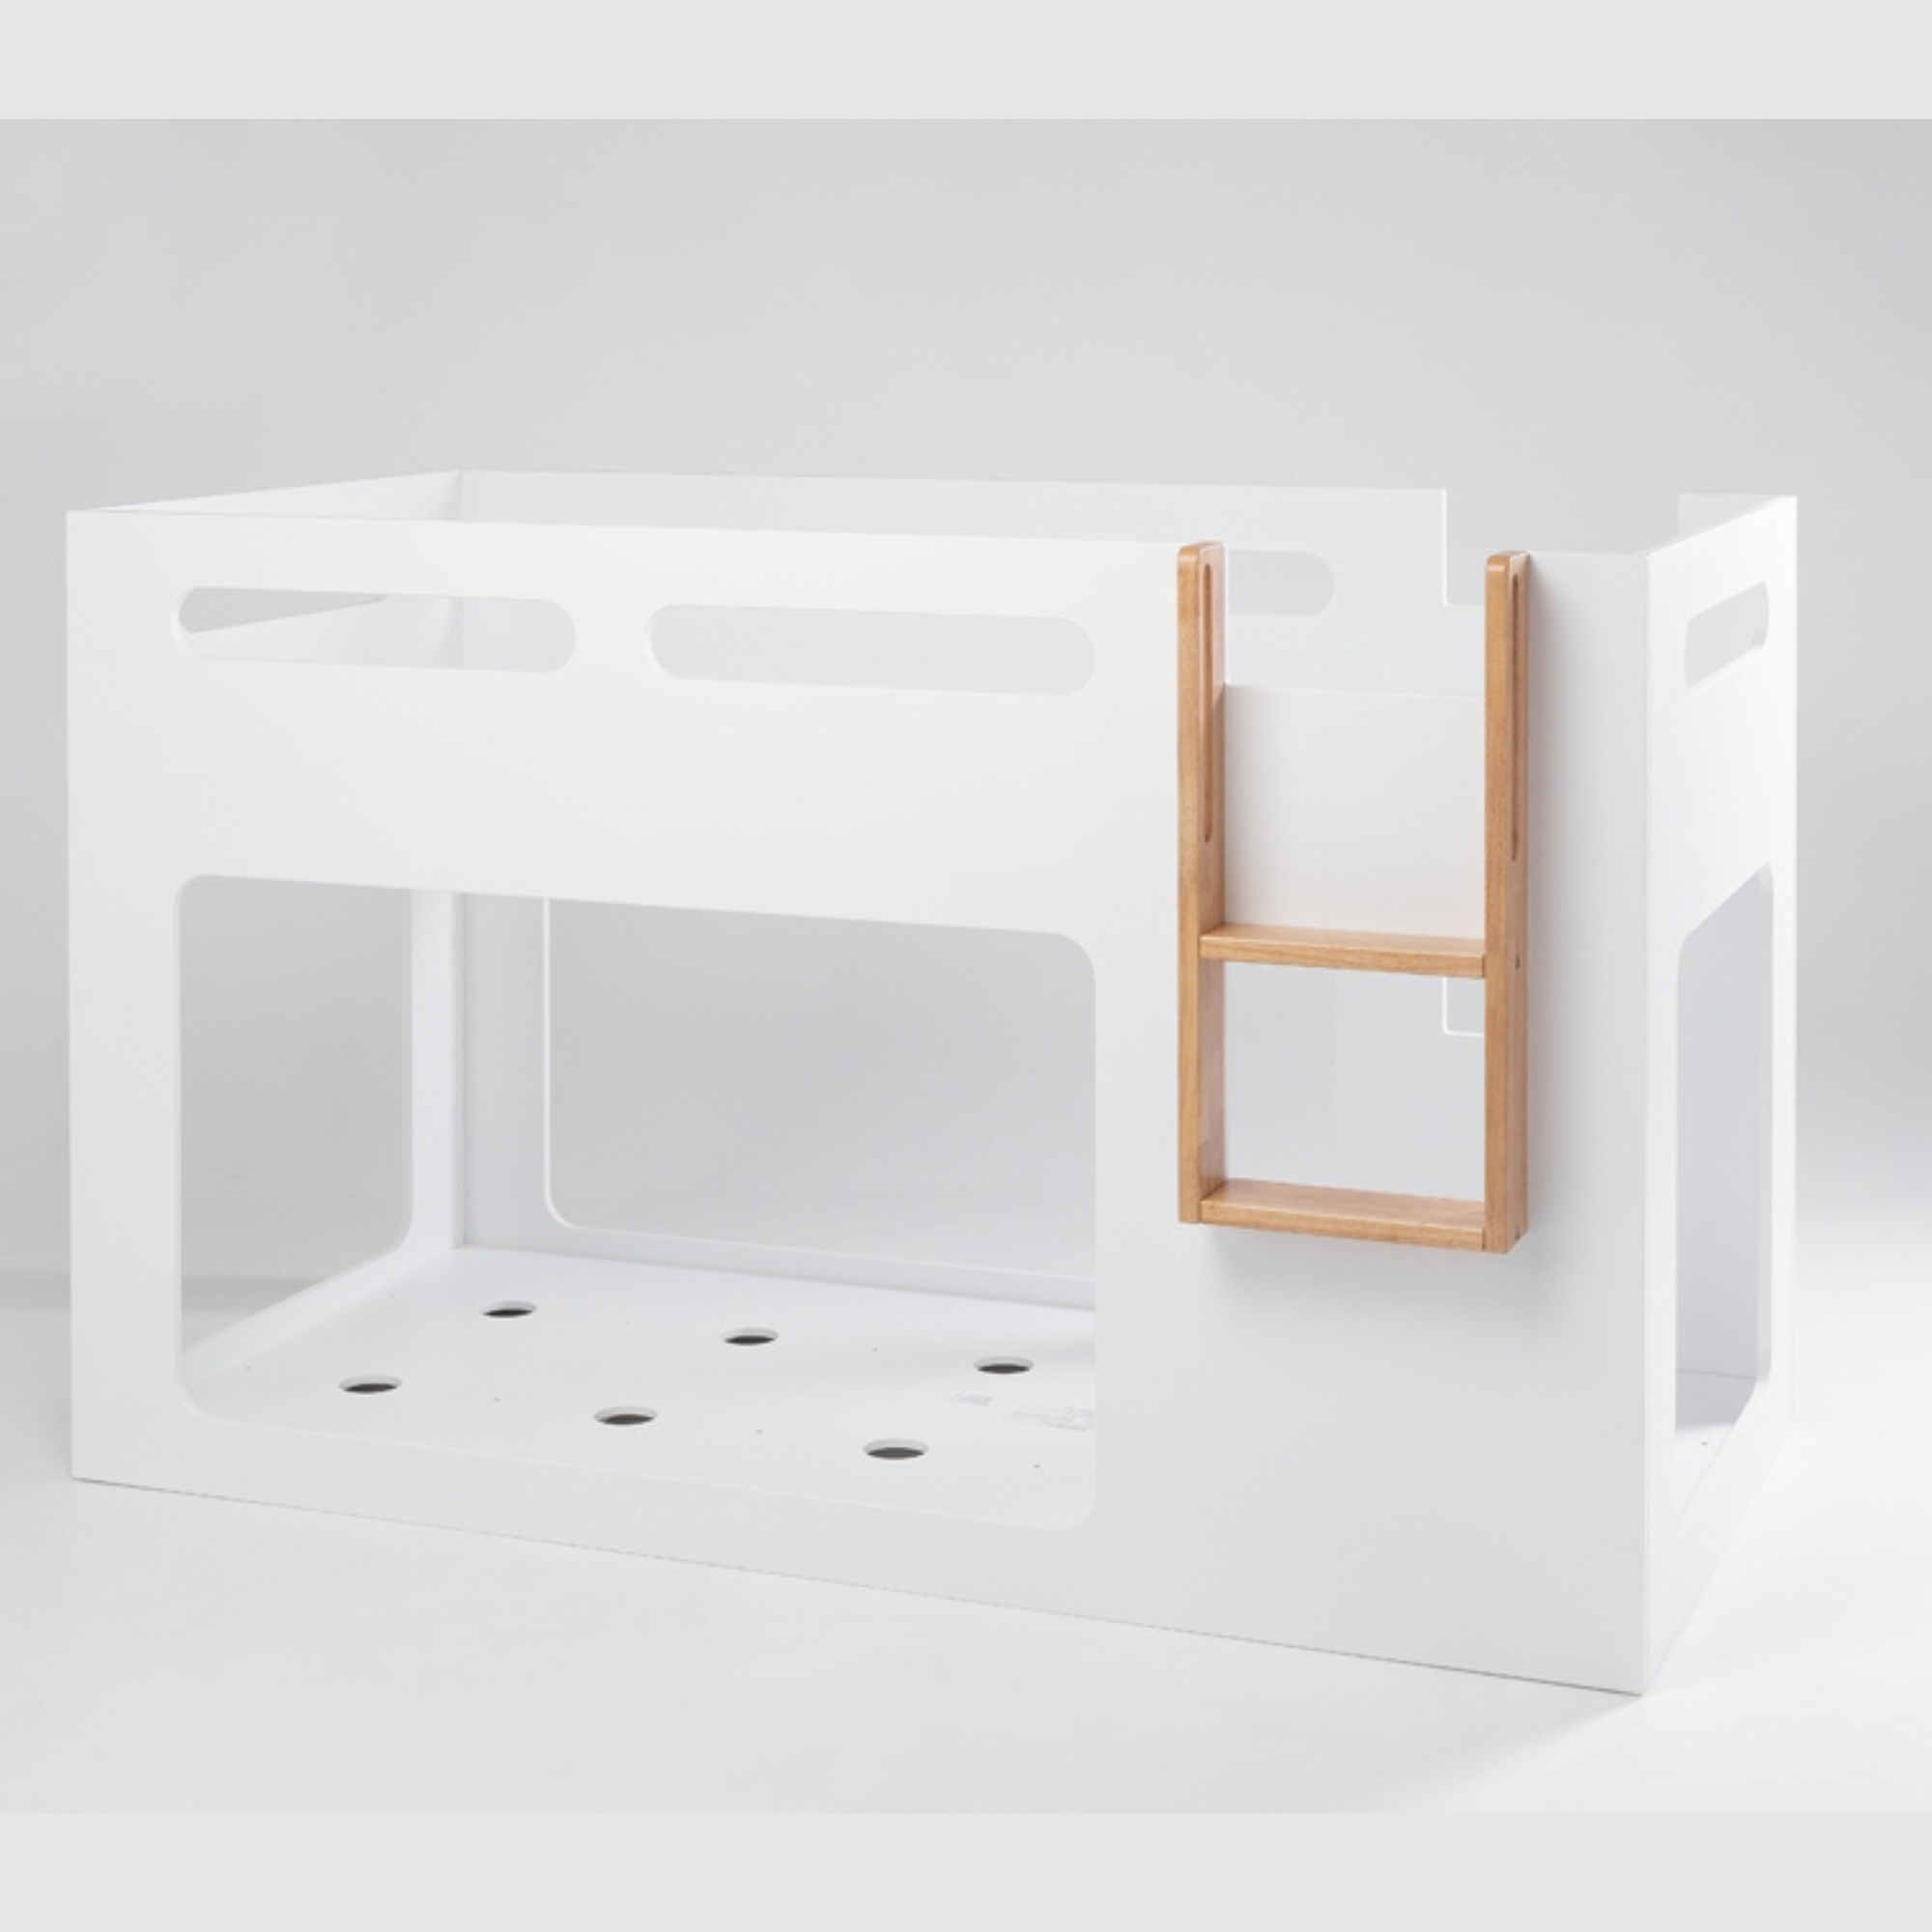 PETITE BUNK FOR YOUR LITTLE PEOPLE